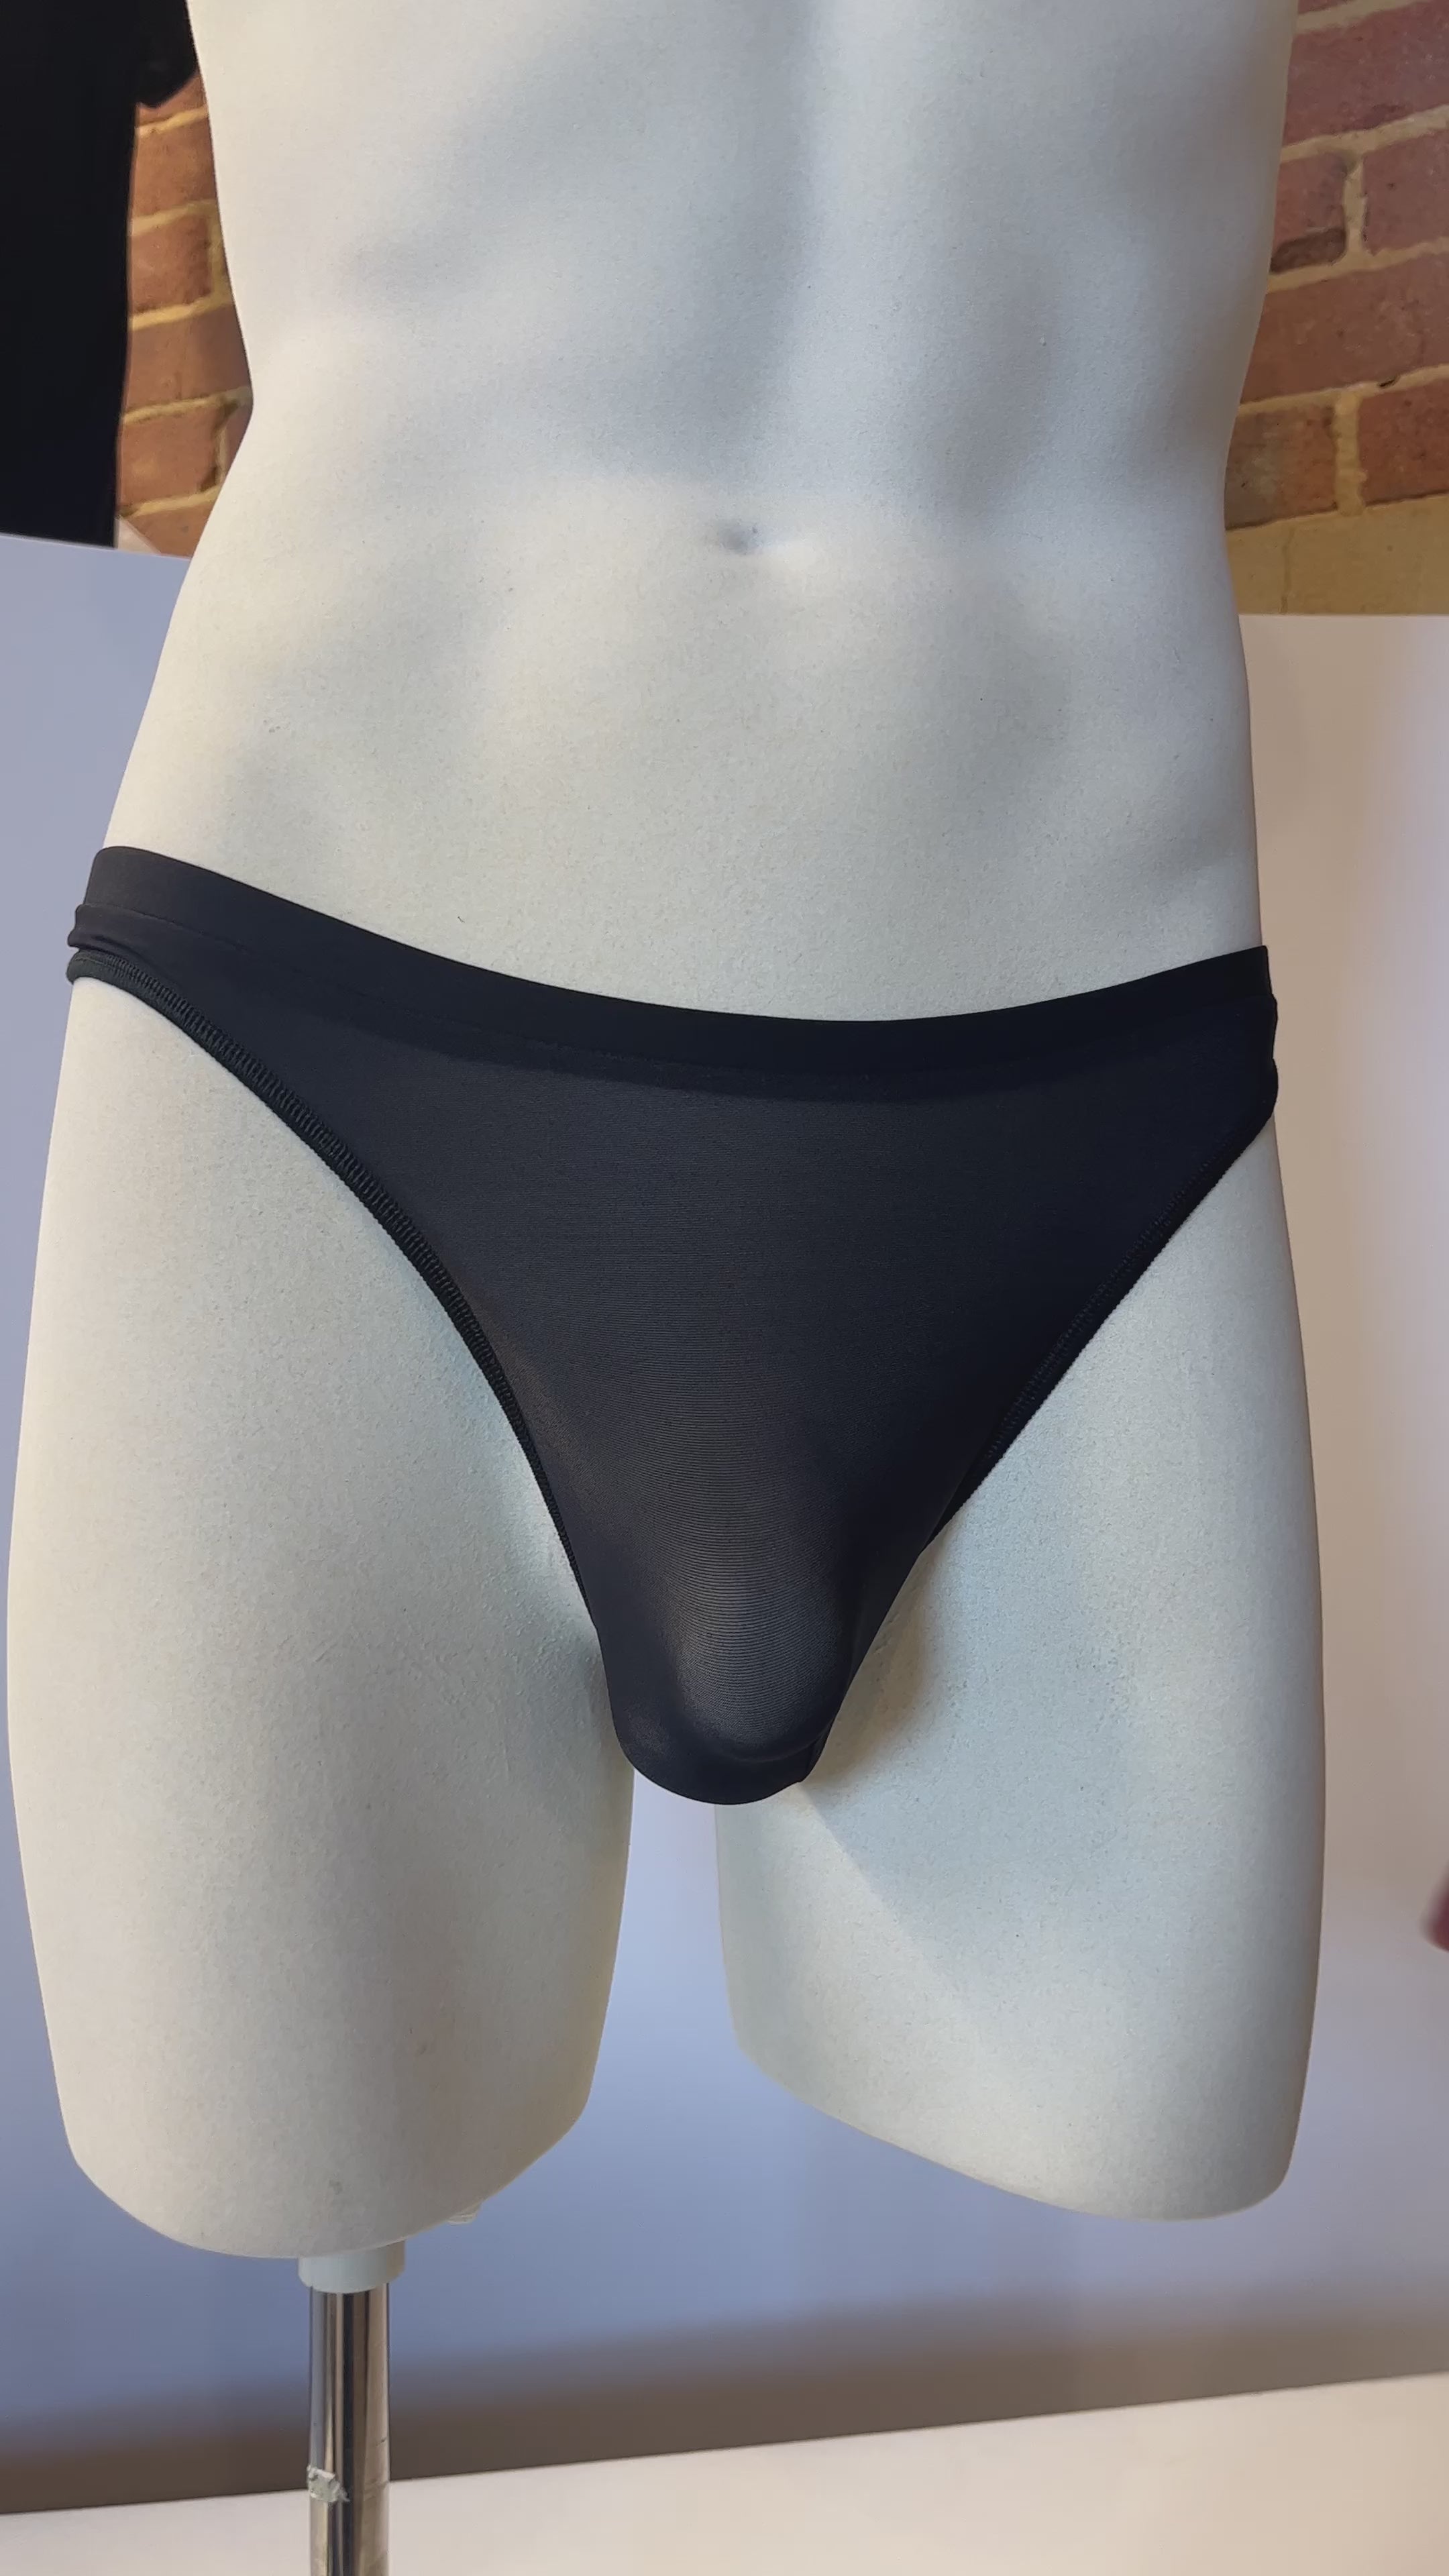 sexy black panties for him, can men wear lingerie?, sexy underwear for men, best panties for men, men's cute panties, soft black panties for him, strappy black sexy panties for men, trans panties, trans friendly lingerie, thongs for men, things for him, men in thongs, best thongs for men, thongs for trans women, thongs for trans, trans friendly lingerie